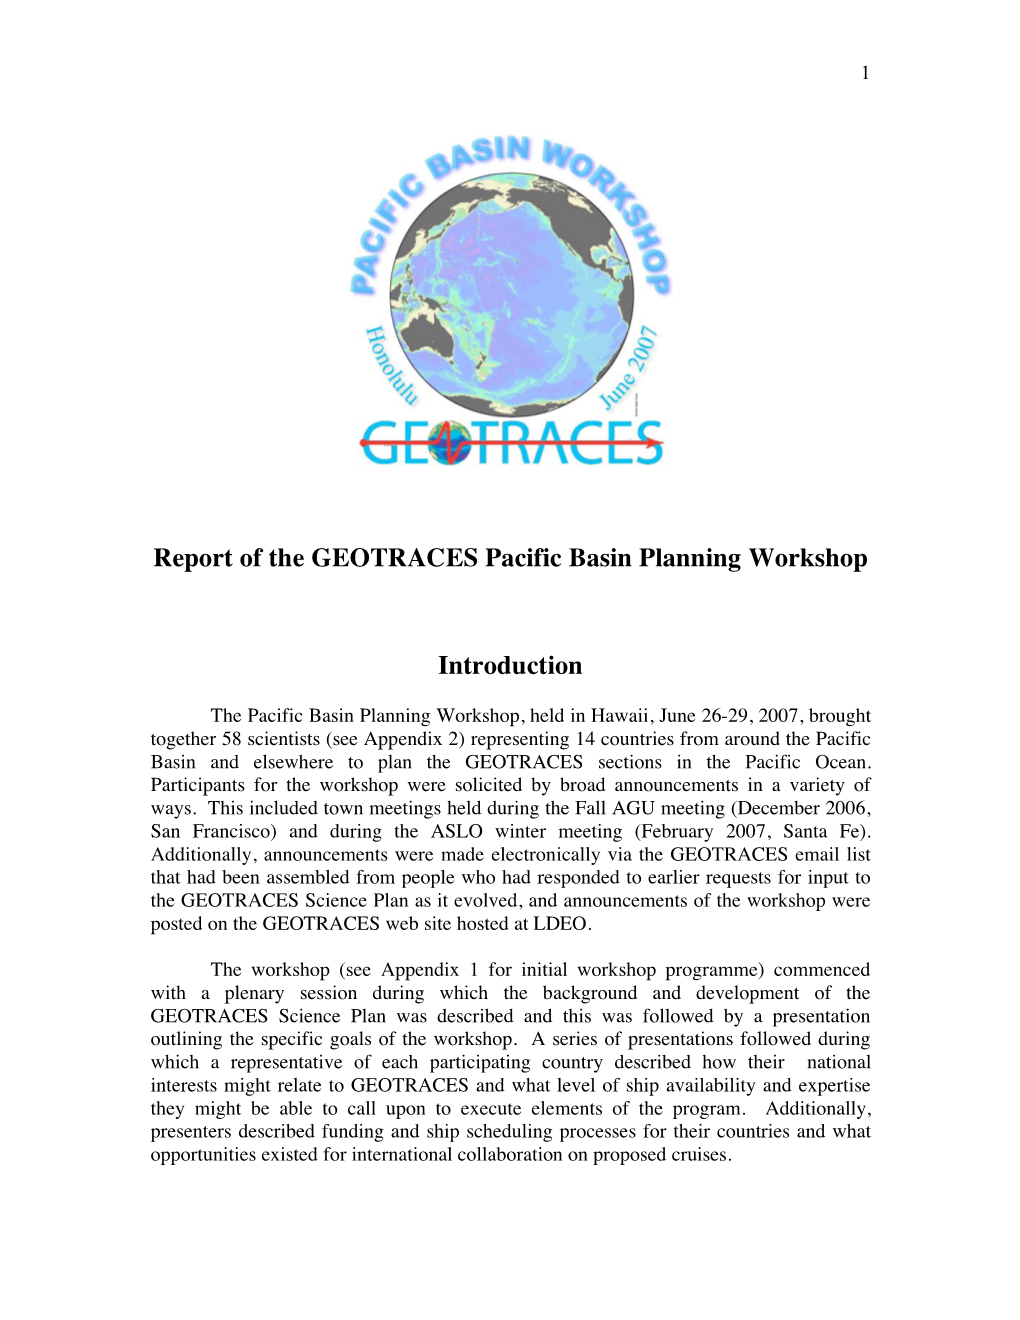 Report of the GEOTRACES Pacific Basin Planning Workshop